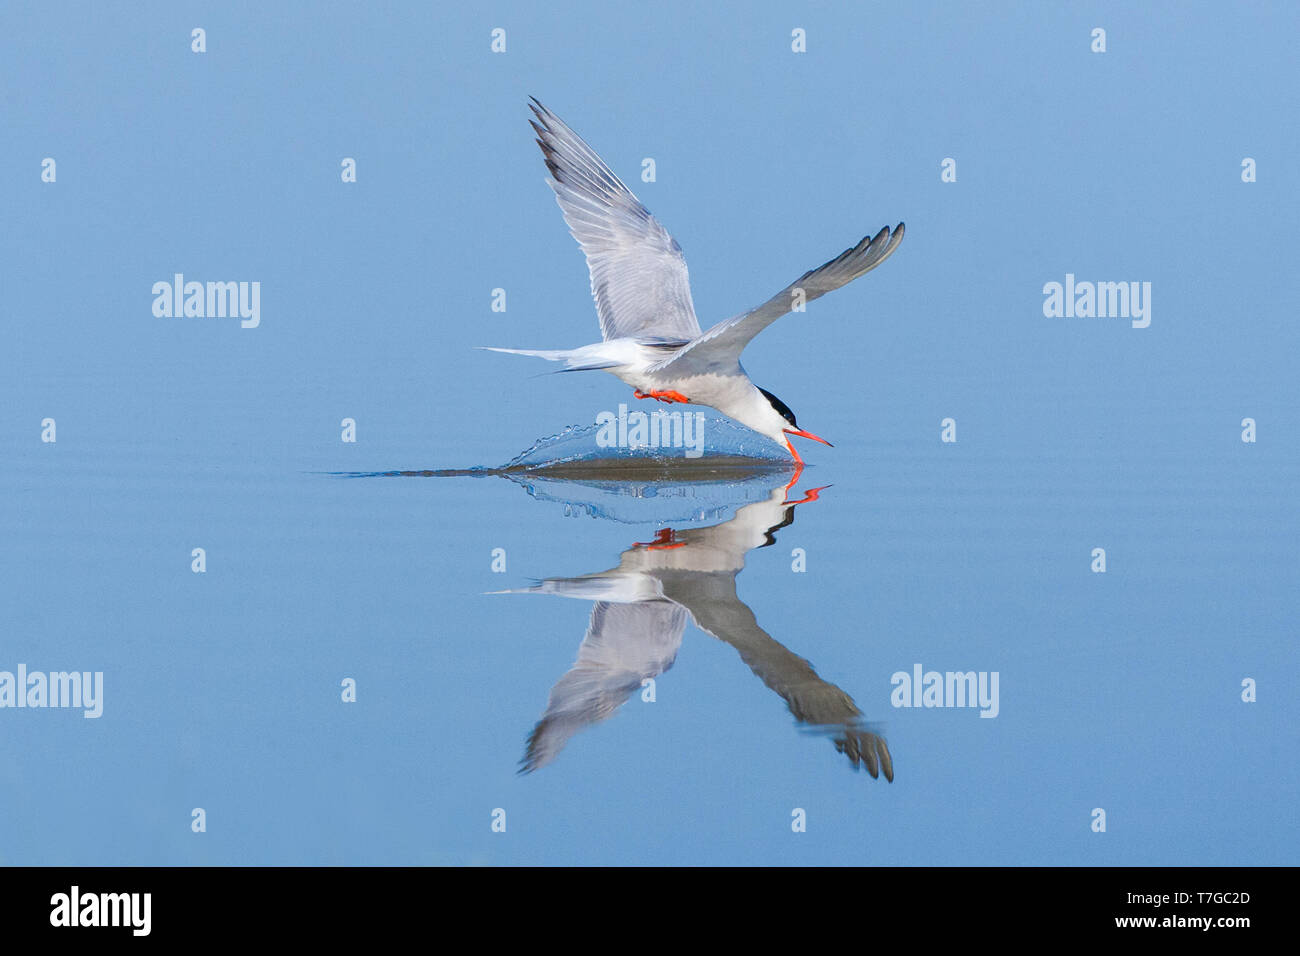 Adult Common Tern (Sterna hirundo) drinking water from a blue colored freswater lake near Skala Kalloni on the island of Lesvos in Greece. Stock Photo